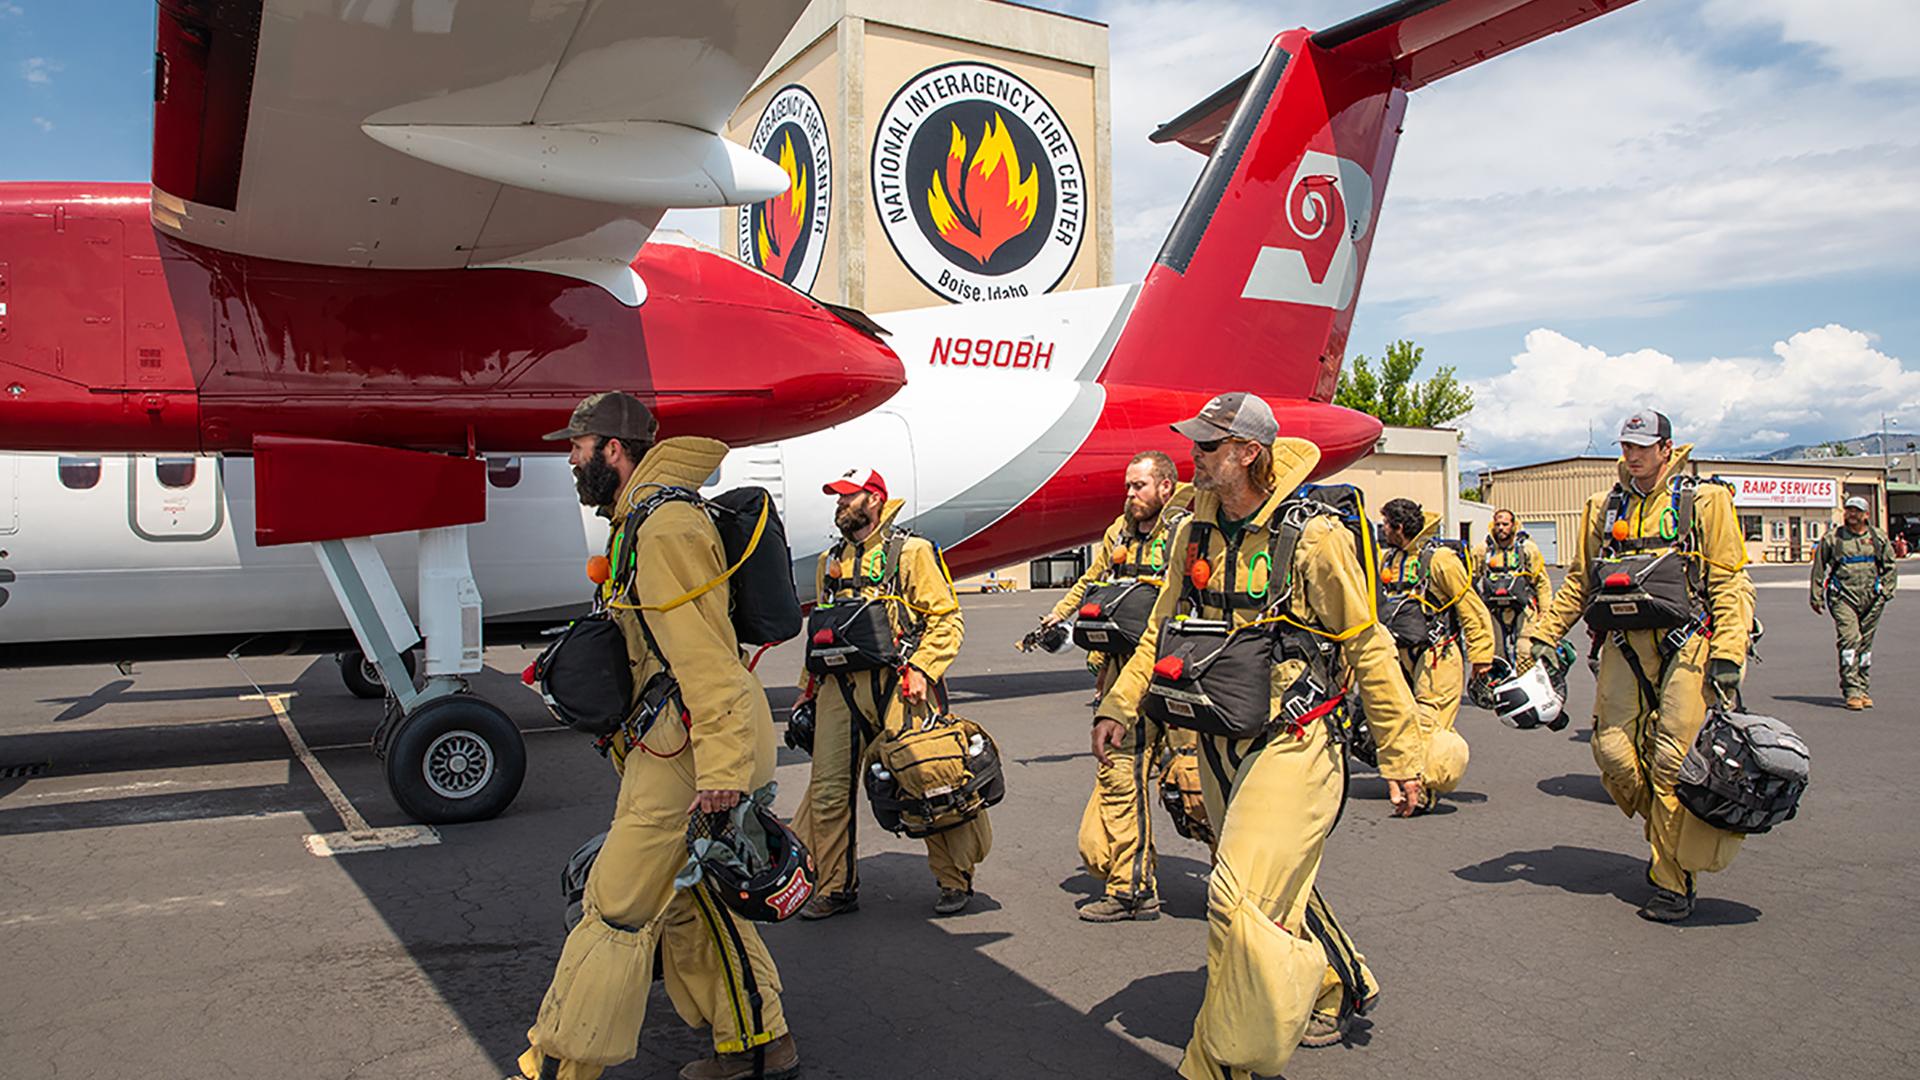 Smokejumpers prepare to board plane at the National Interagency Fire Center in Idaho. Photo by Neal Herbert, DOI.